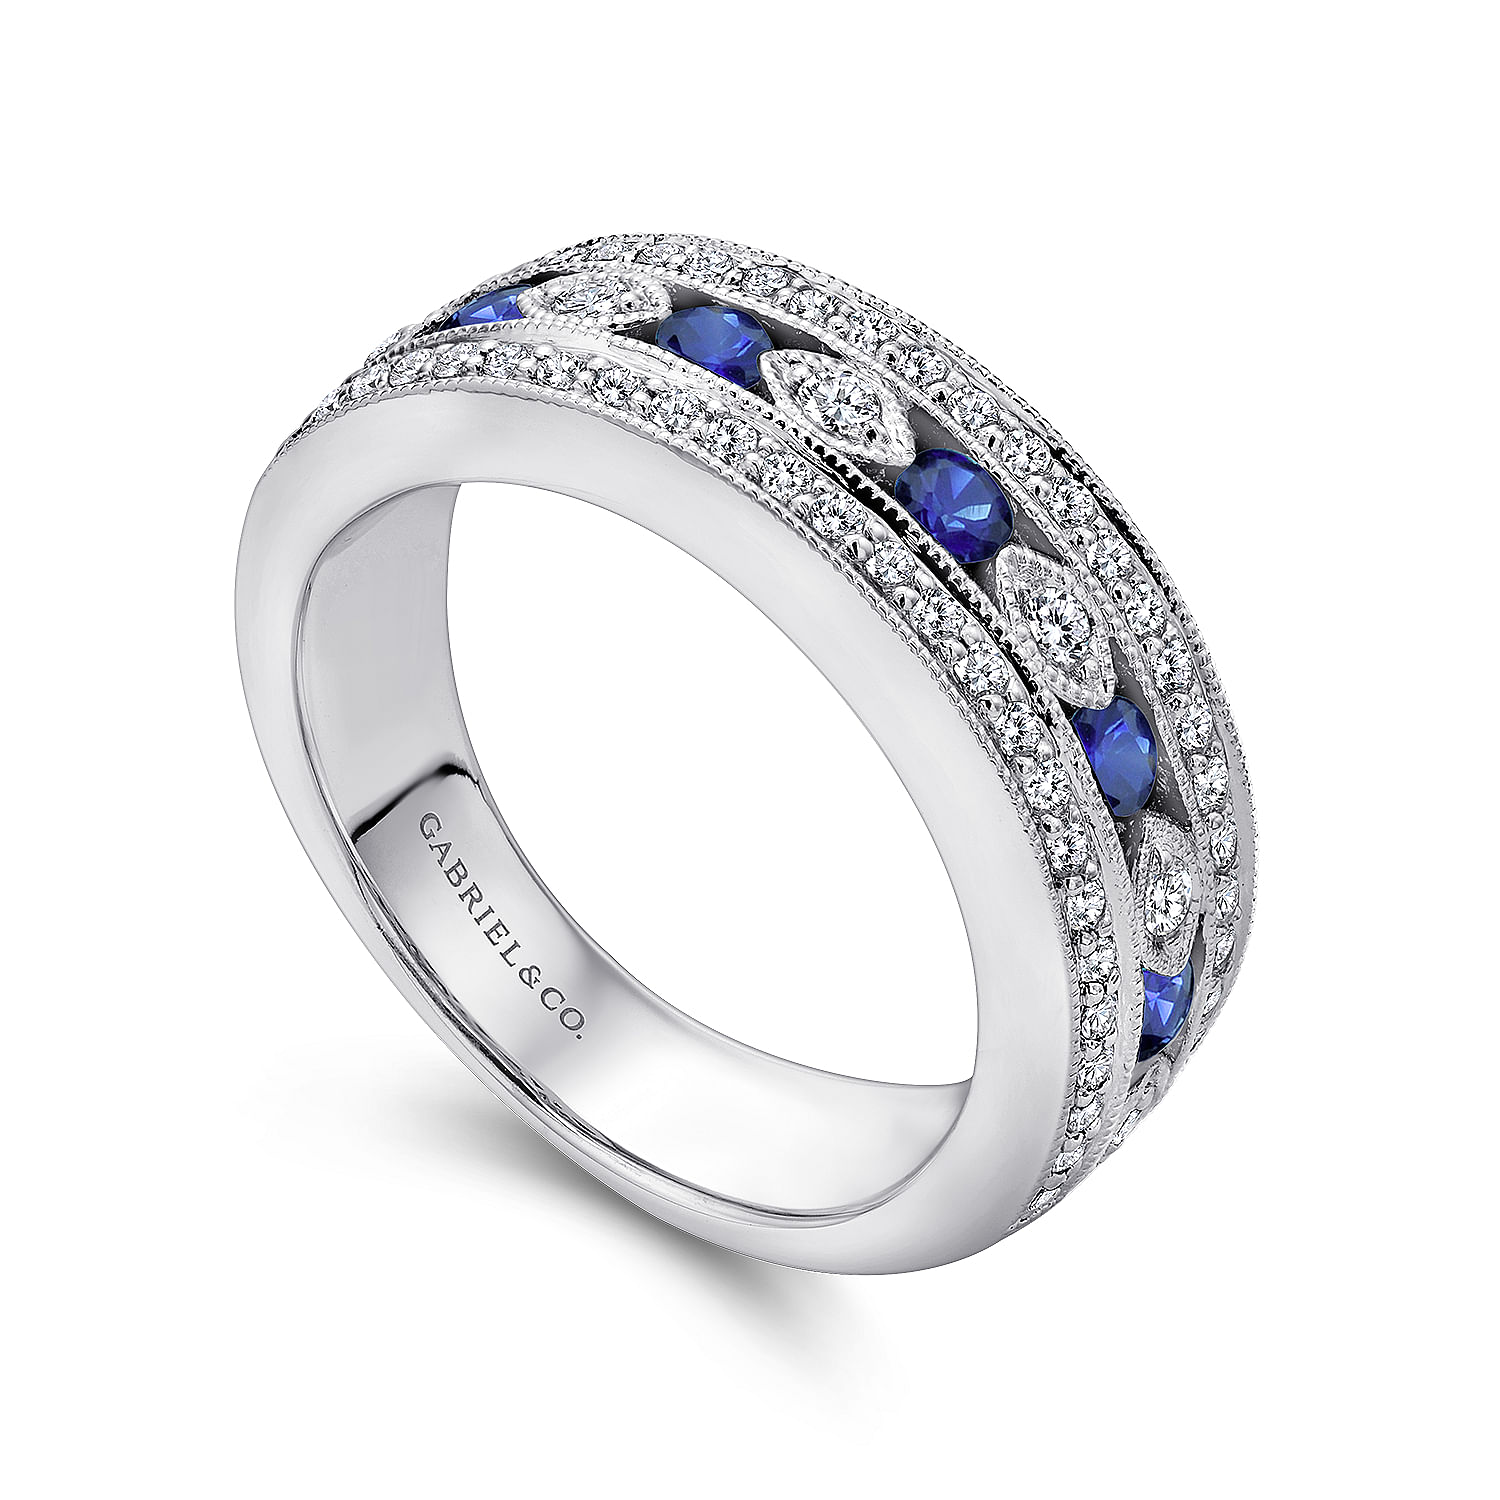 14K White Gold Vintage Inspired Sapphire and Diamond Ring